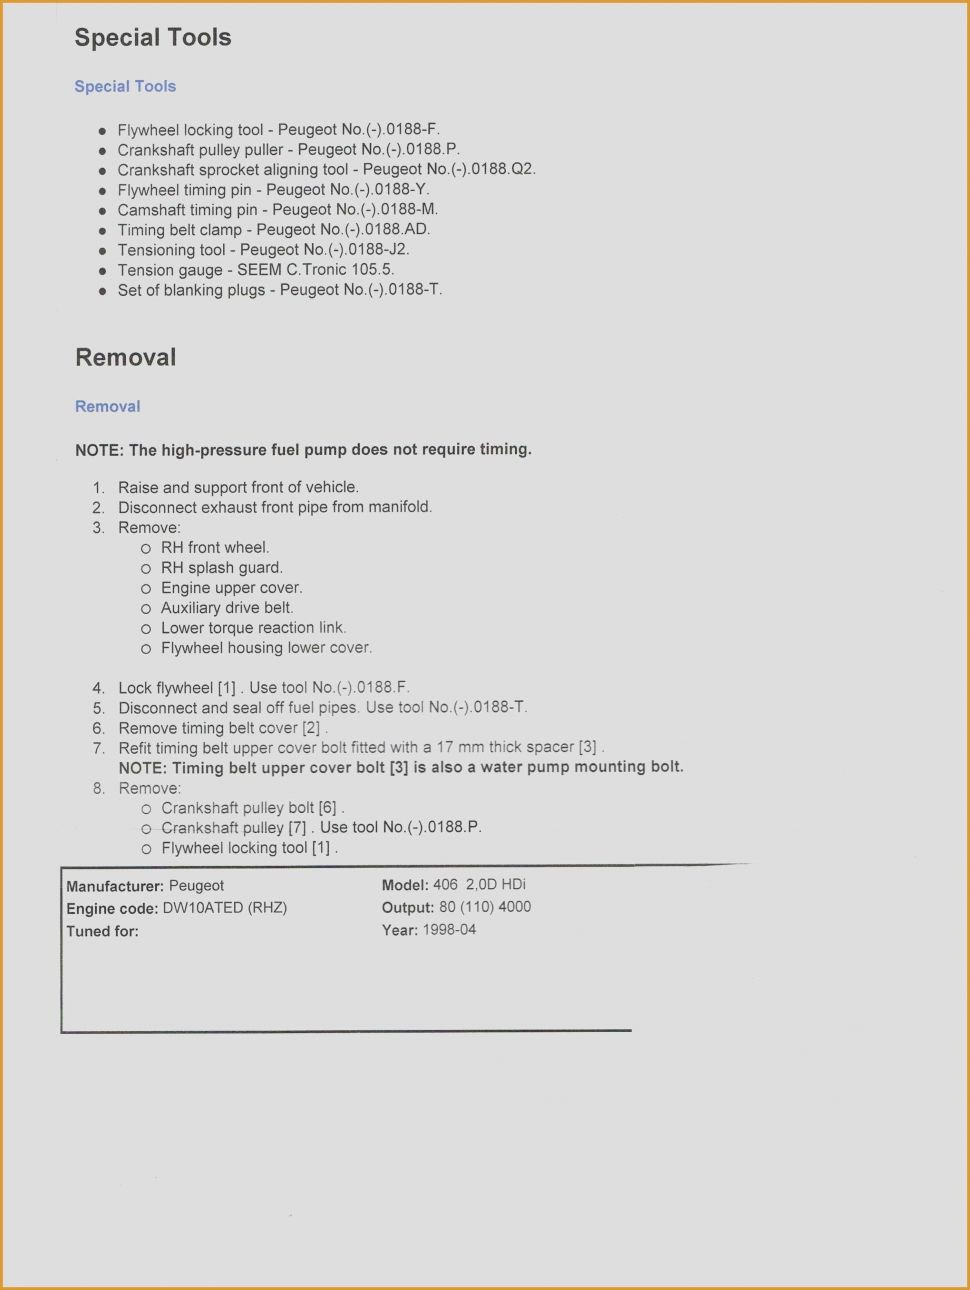 Free Resume Templates For Word Microsoft Word Resume Template 2019 Hairstyles Resume Templates Word 2019 Creative Free Word Resume Of Microsoft Word Resume Template 2019 free resume templates for word|wikiresume.com